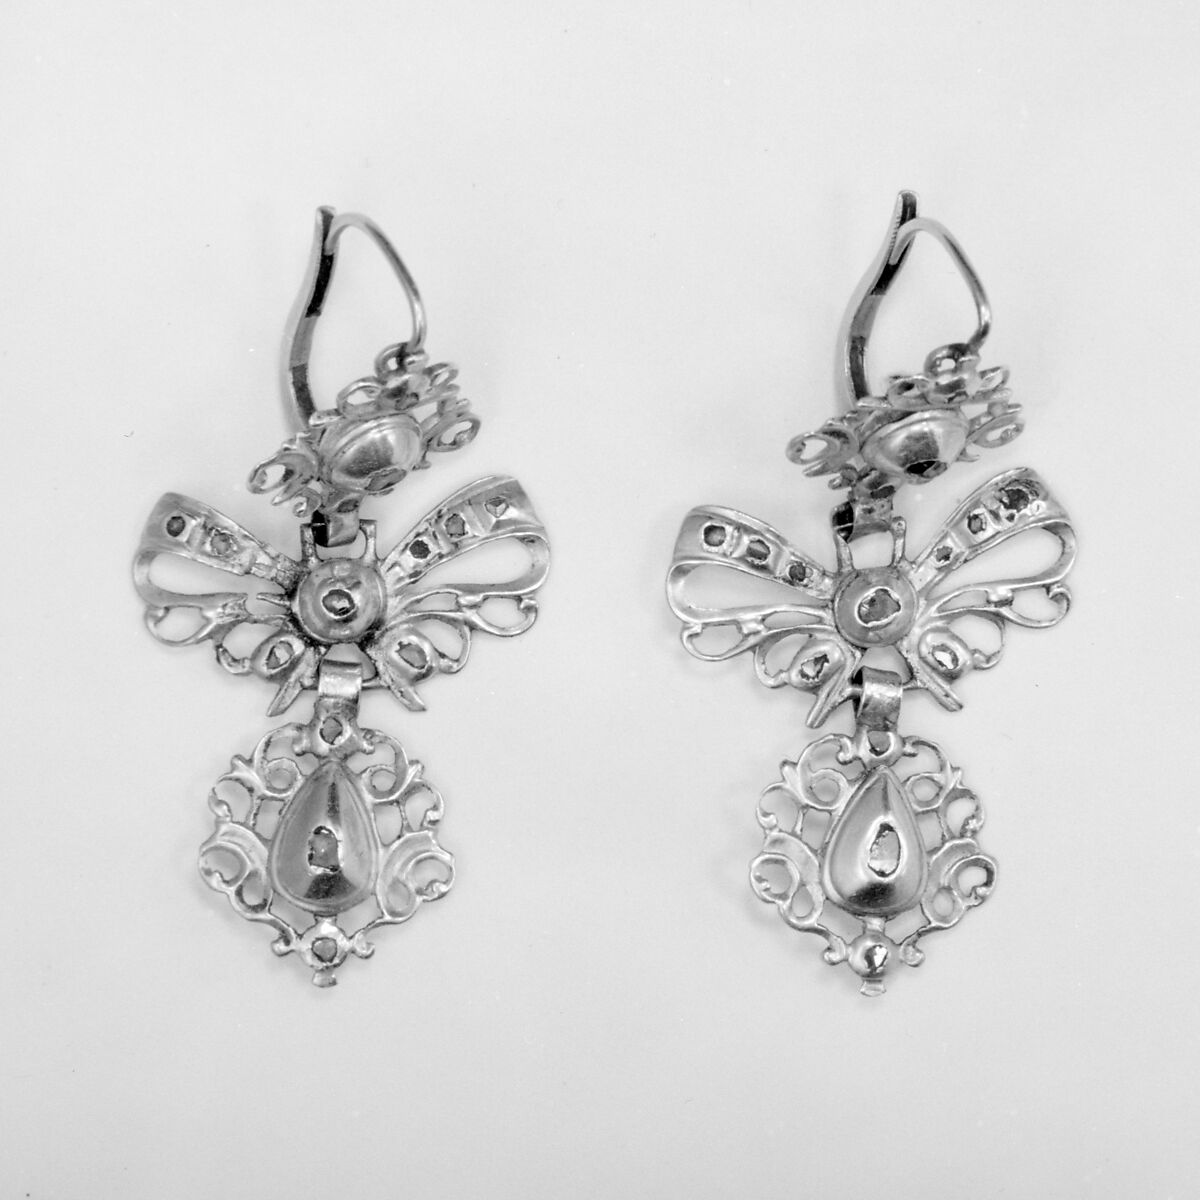 Pair of earrings, Gold, diamonds, probably Spanish 